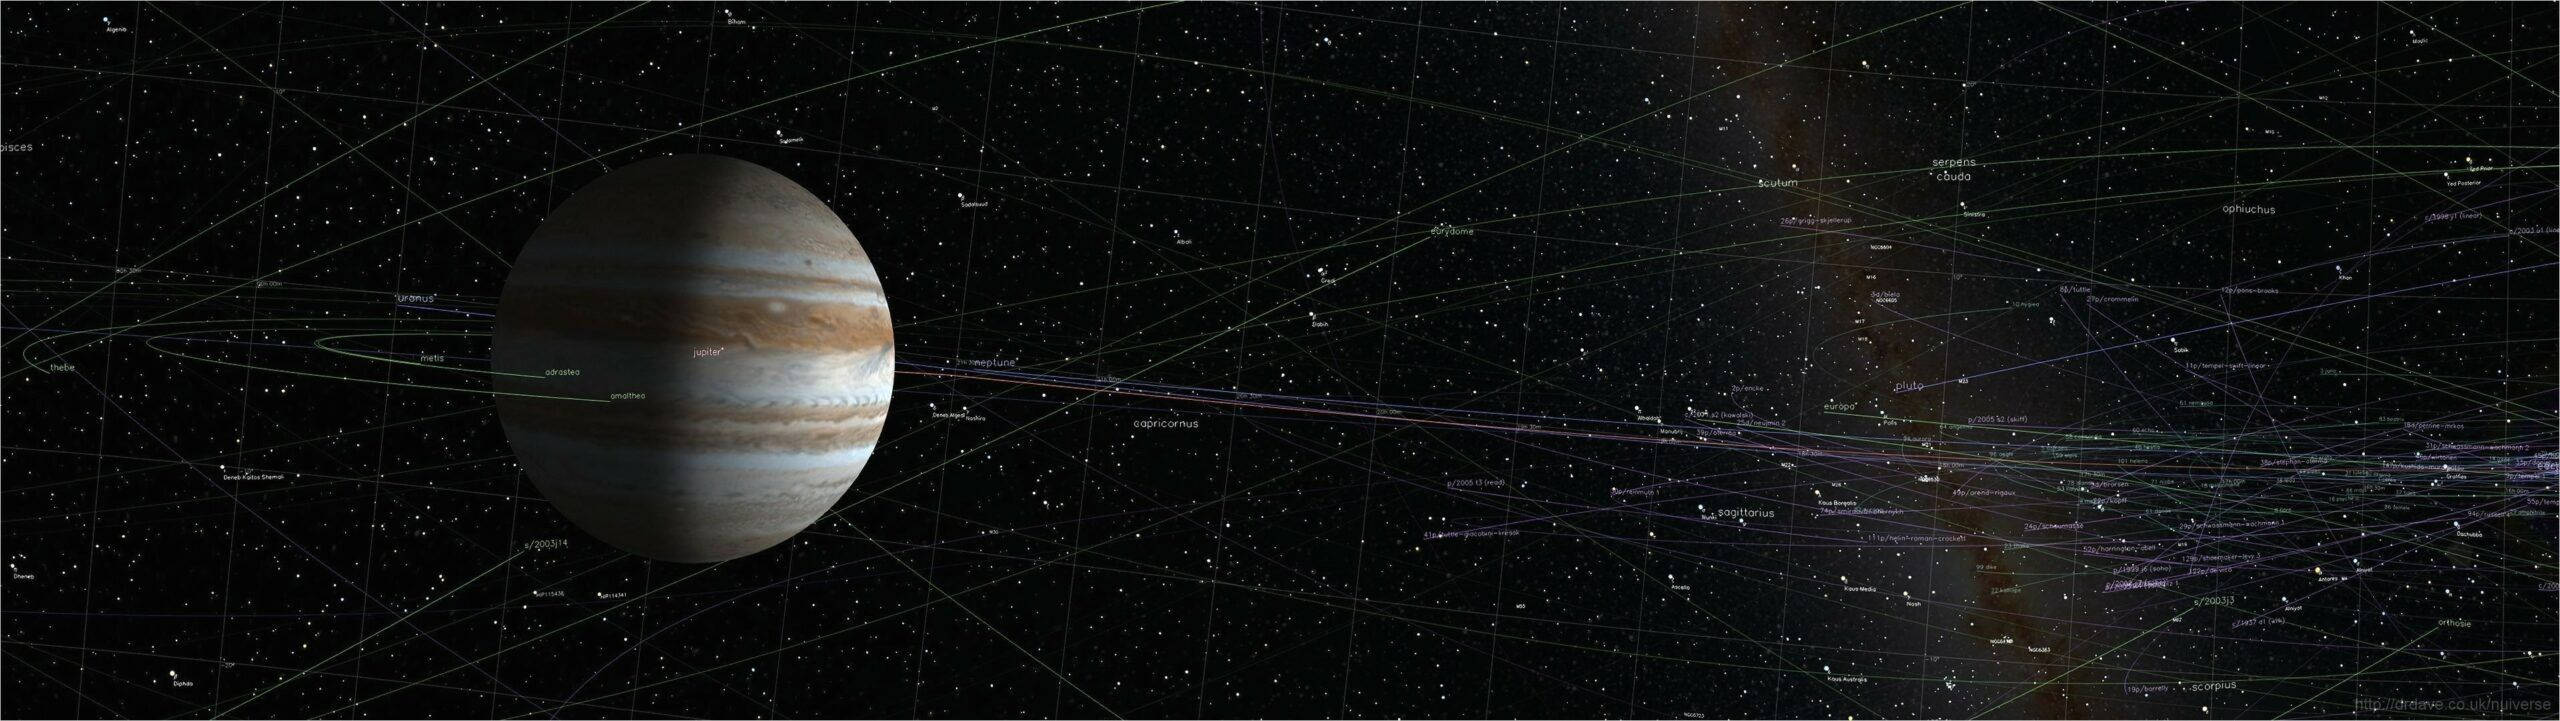 4k Dual Monitor Jupiter And Constellations Background